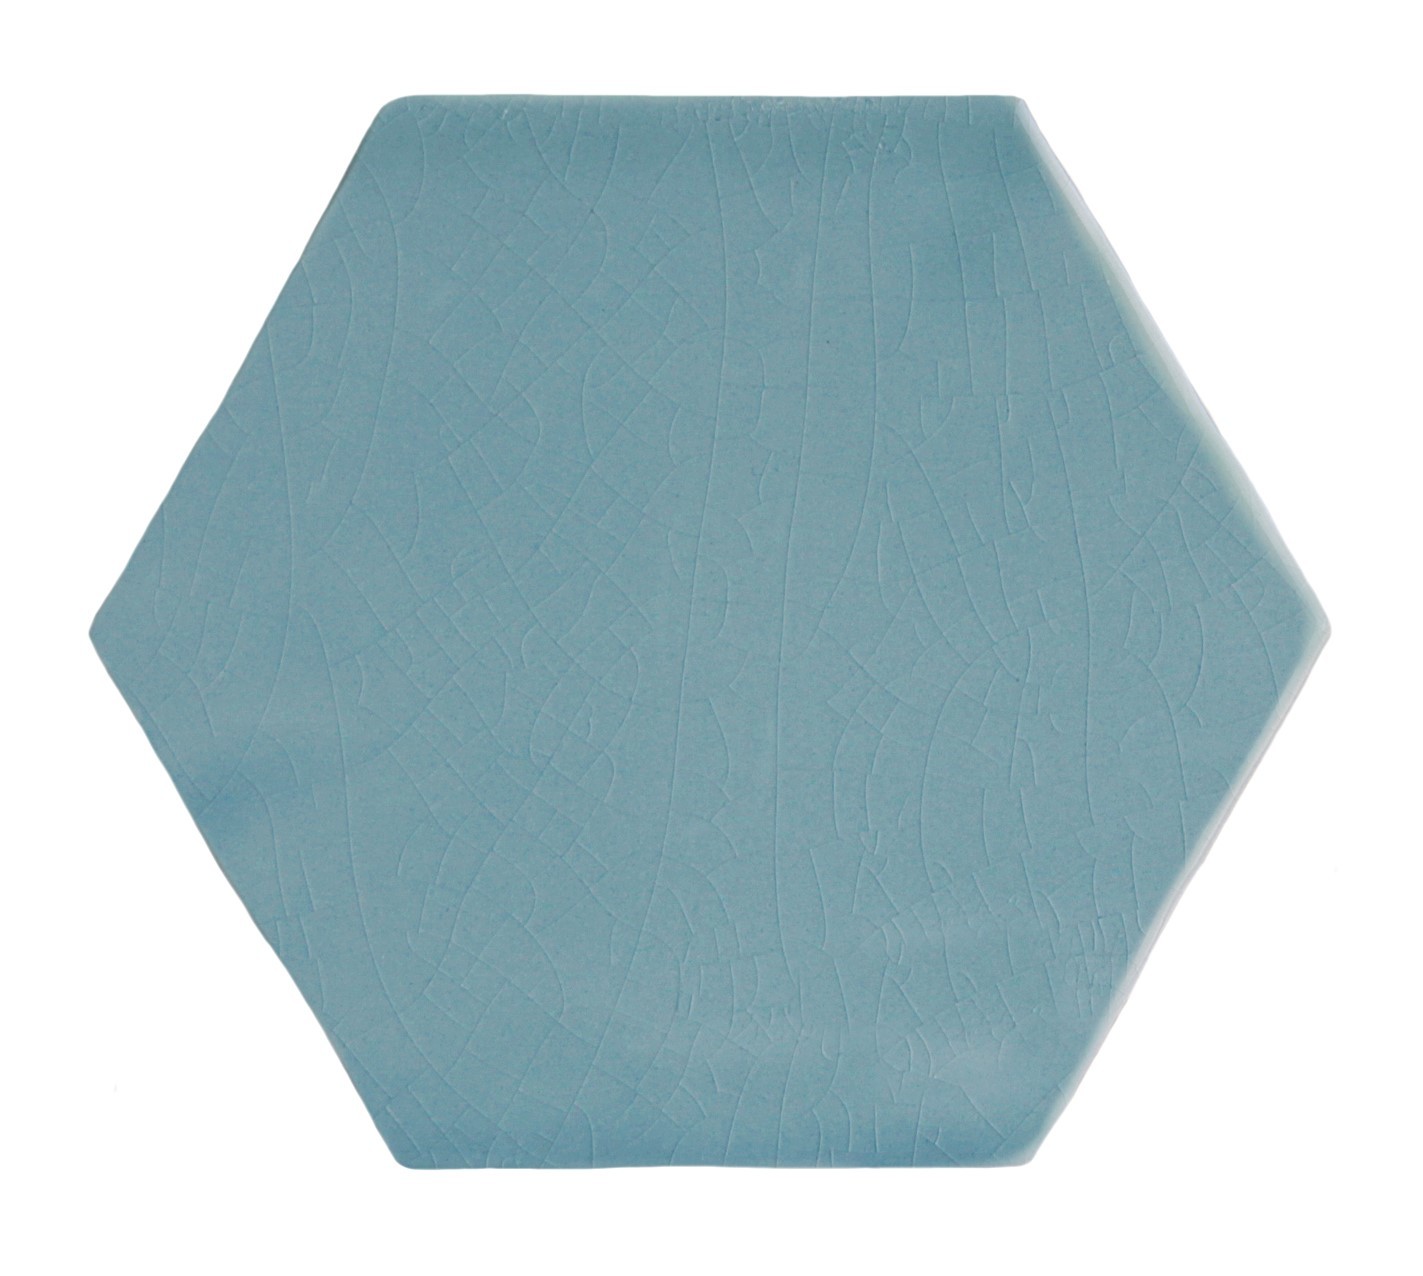 Hebrides Hexagon Gloss, product variant image